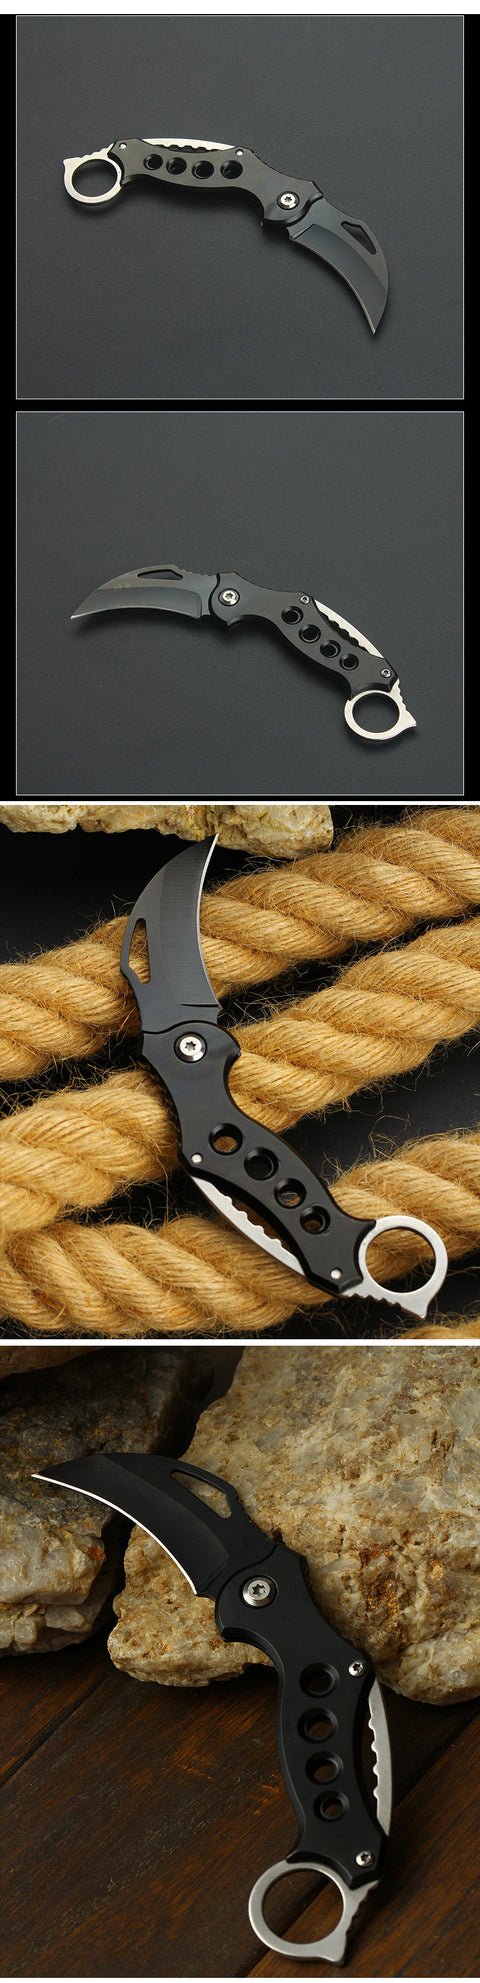 Survival Hunting Self Defense Claw Knifes - US Tactical Warehouse